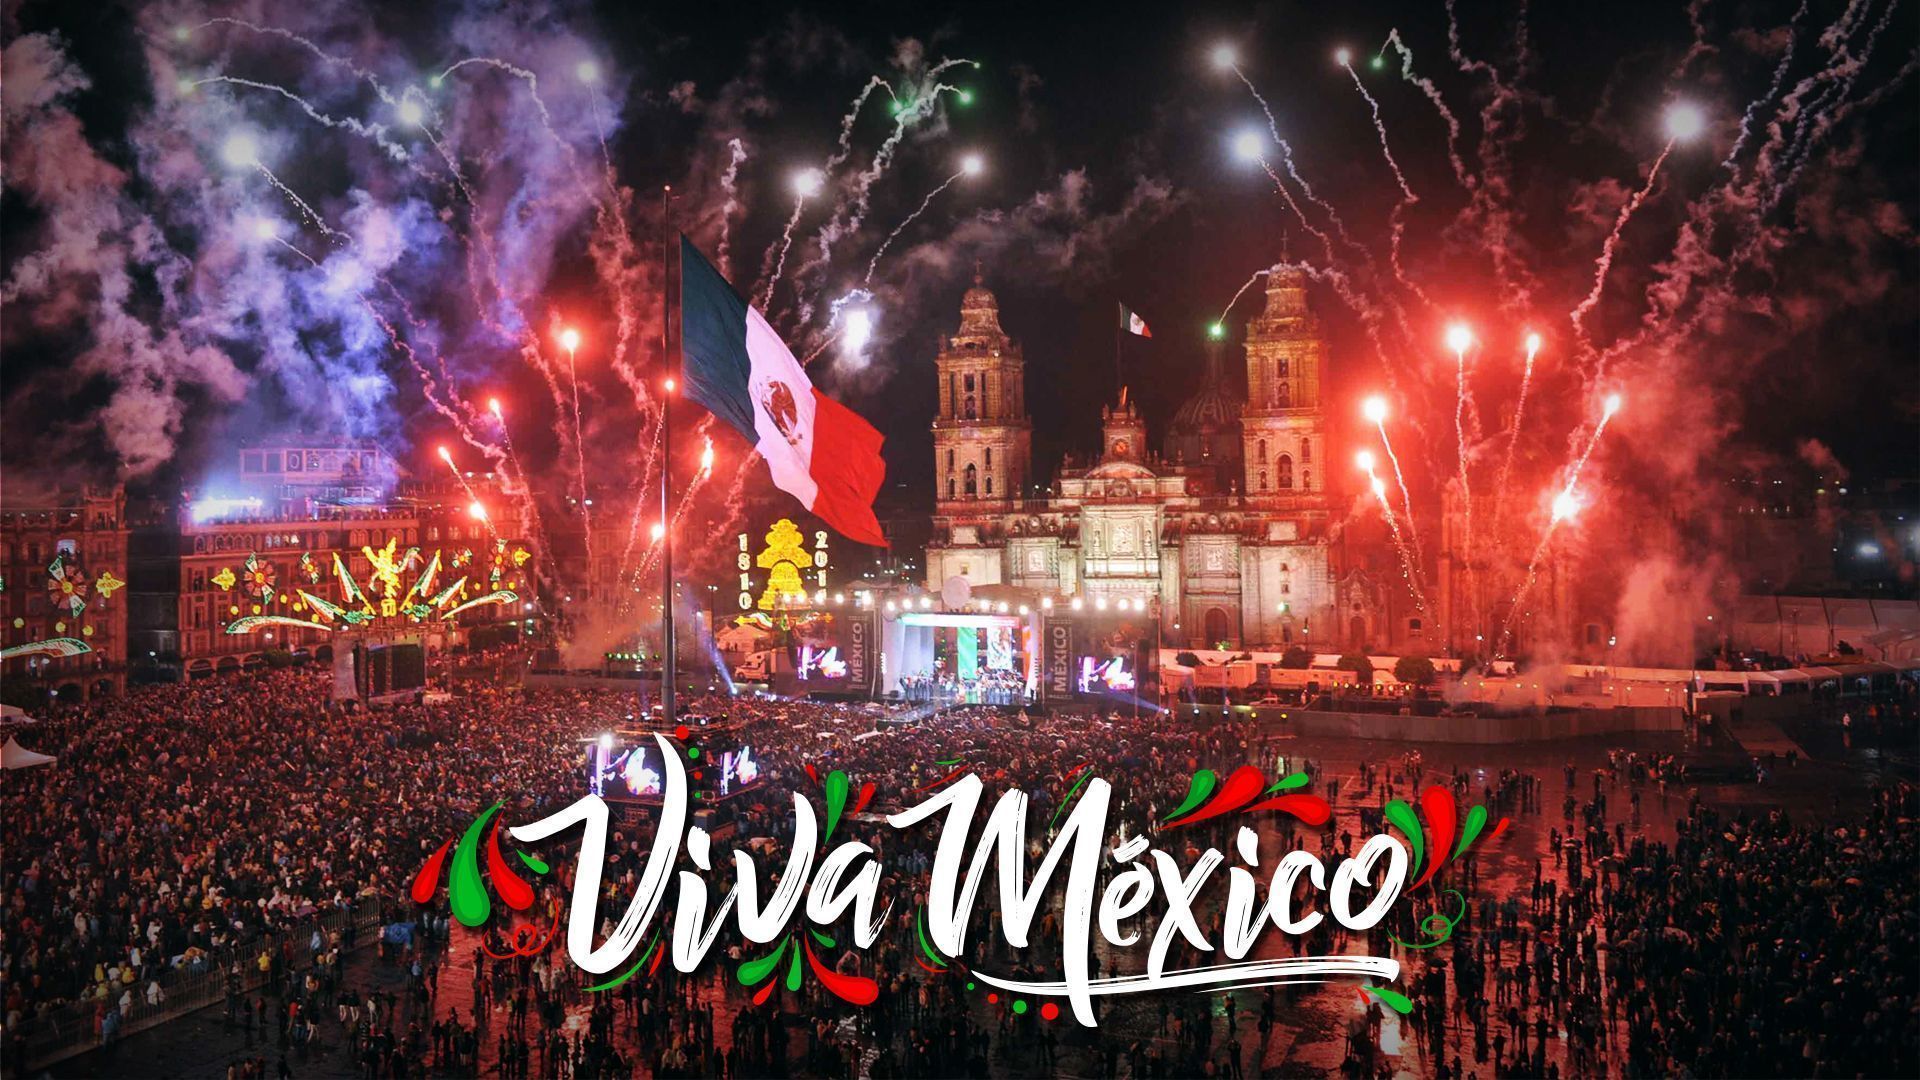 Mexico City's annual Independence Day celebration, Diva Mexico, is one of the largest and most spectacular in the world. - Mexico